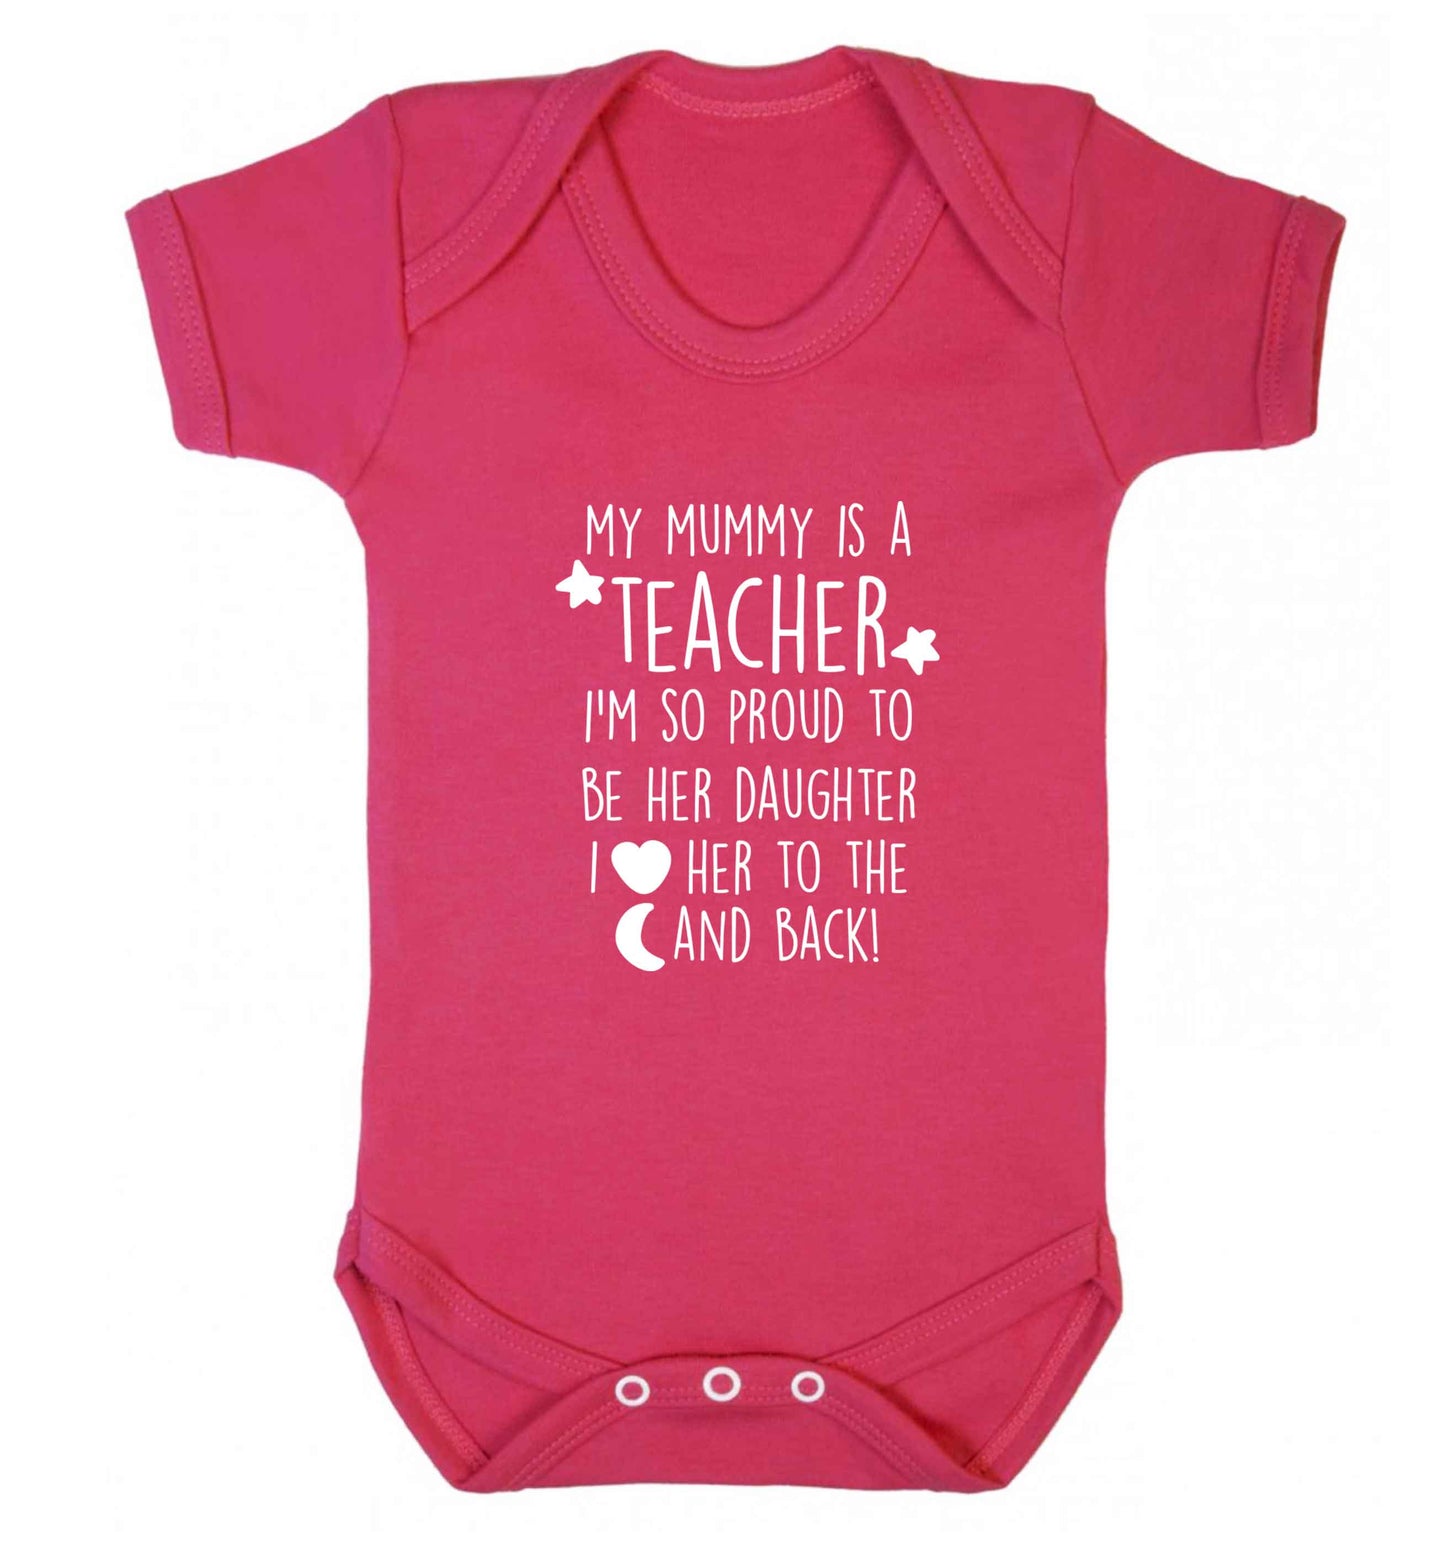 My mummy is a teacher I'm so proud to be her daughter I love her to the moon and back baby vest dark pink 18-24 months